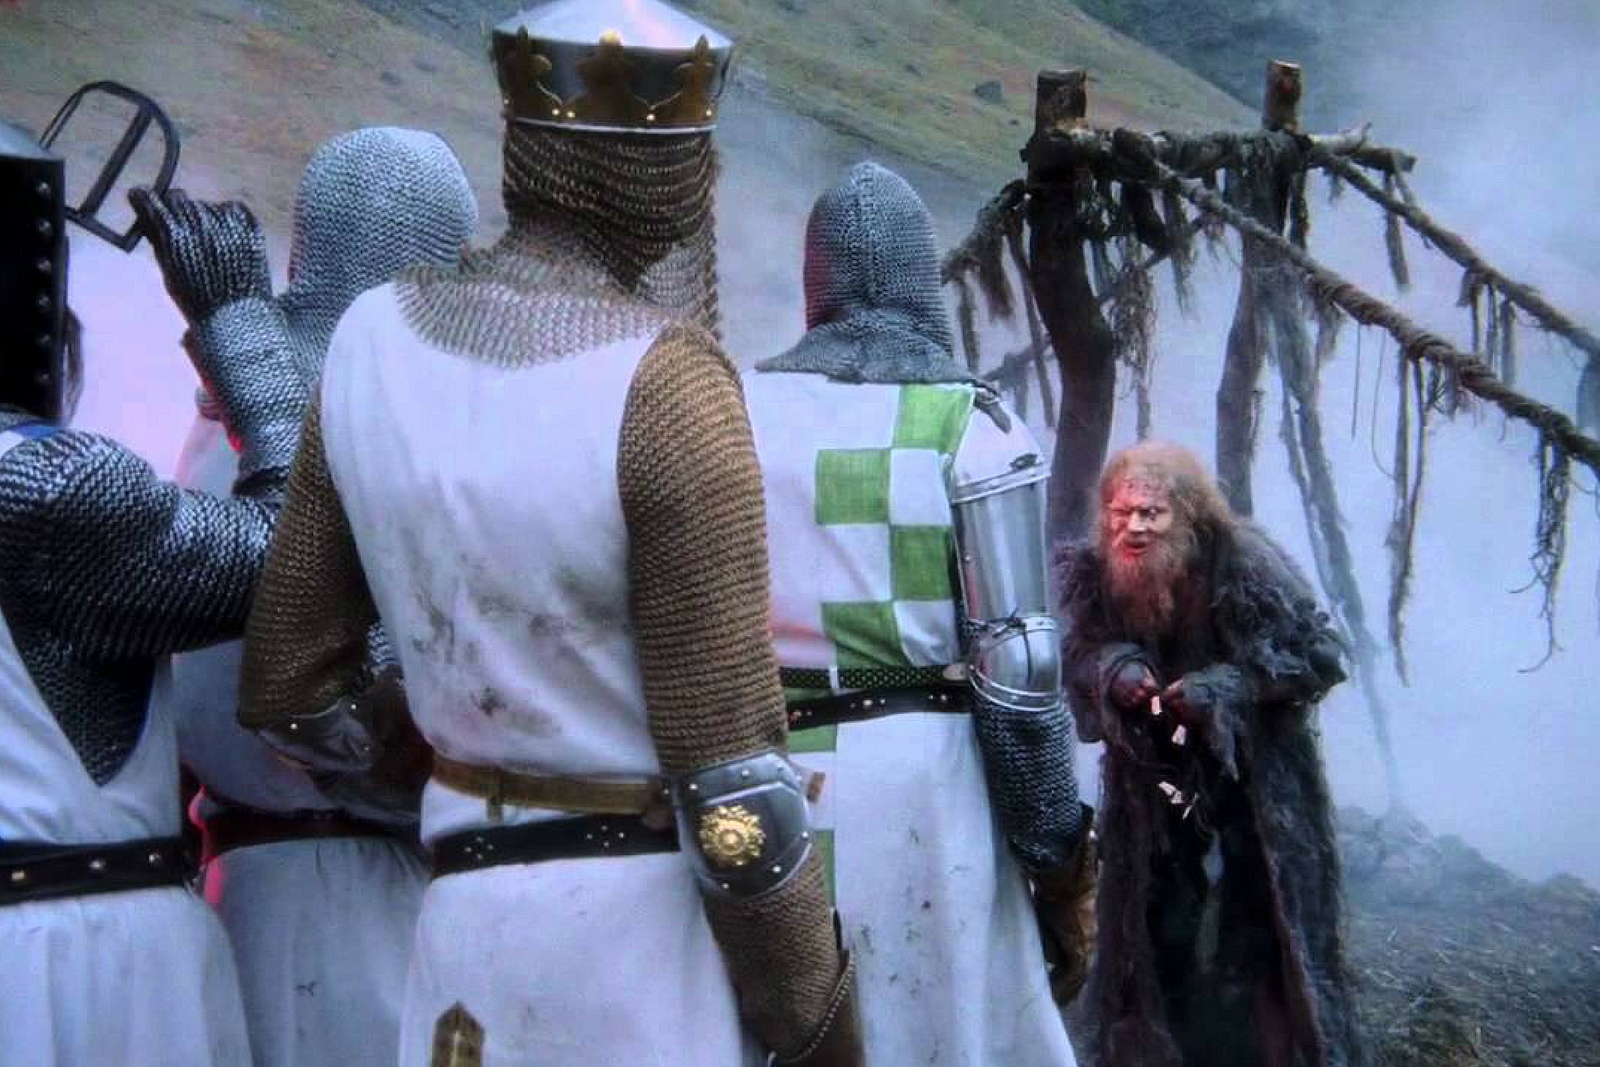 Could Alexa Save King Arthur in Monty Python and the Holy Grail?